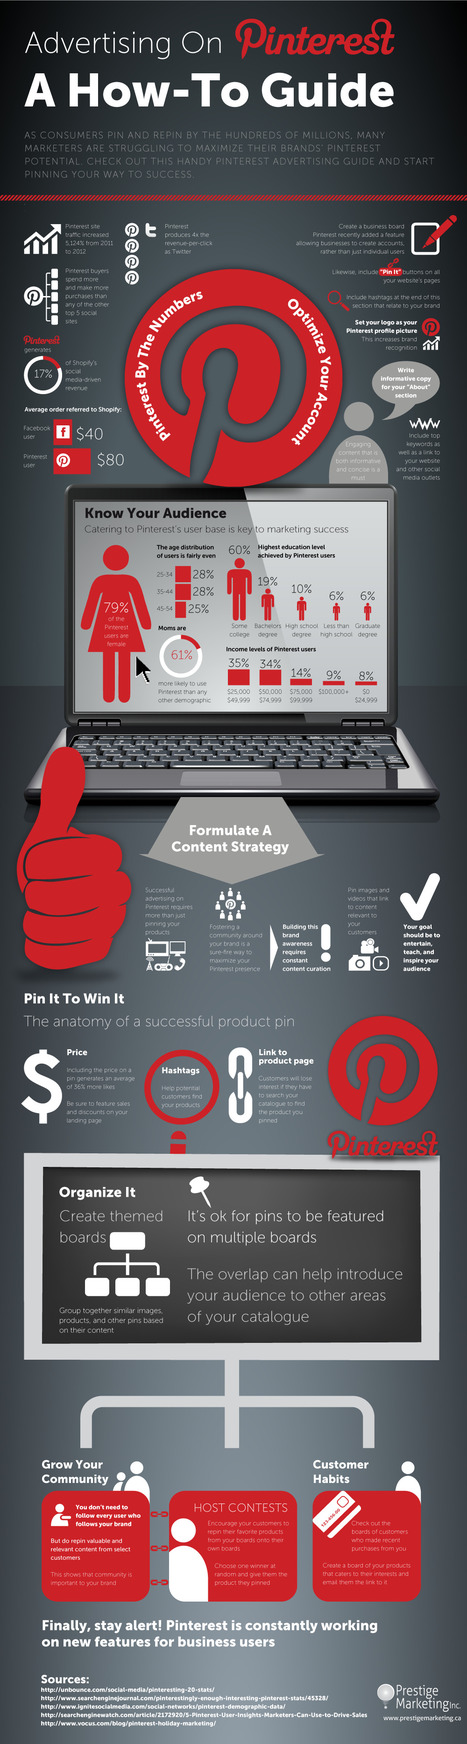 A Marketer's Guide To Pinterest - Infographic | Information Technology & Social Media News | Scoop.it